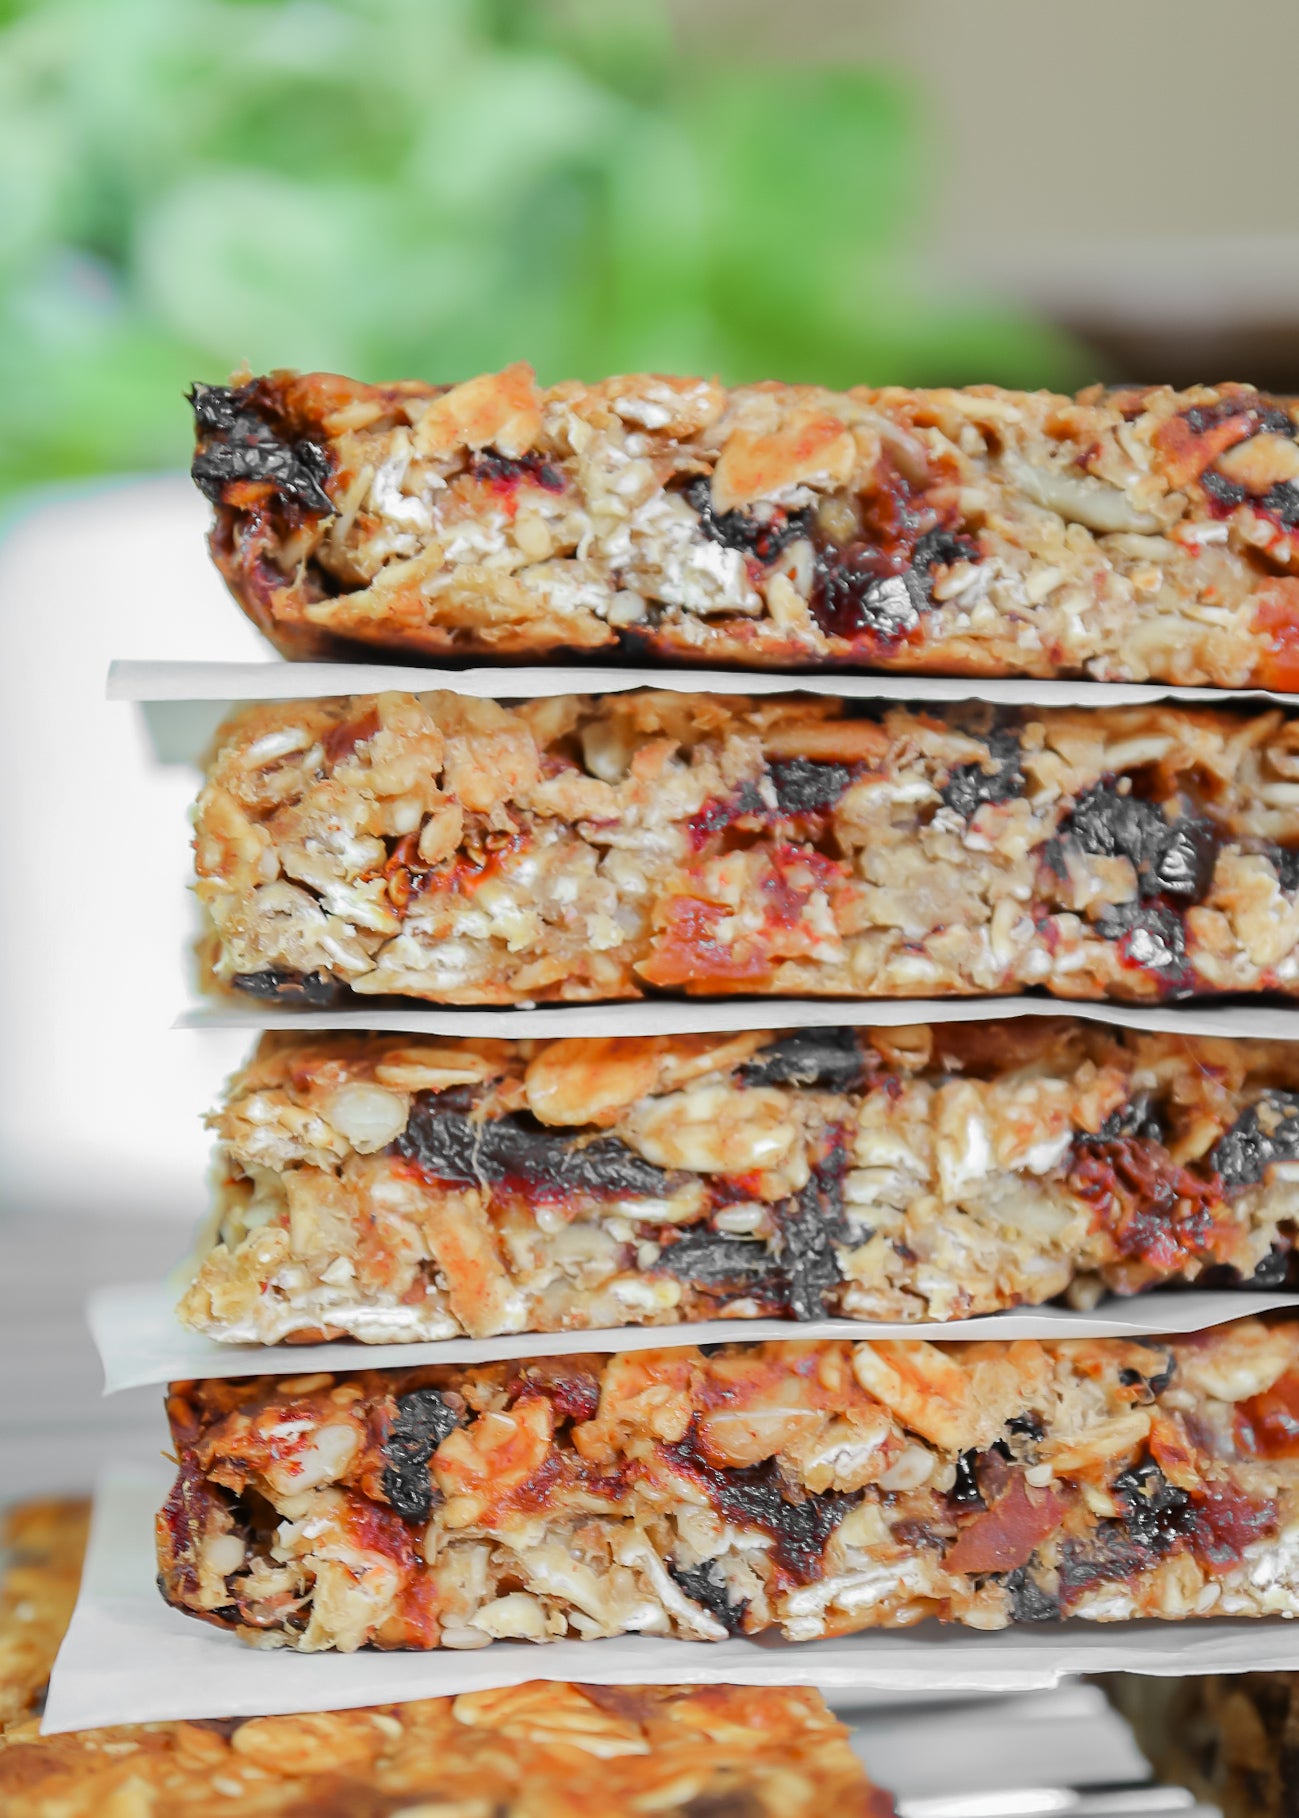 New: Superfood Fruit Granola Protein Bar (sugar-free sweetened with dates)